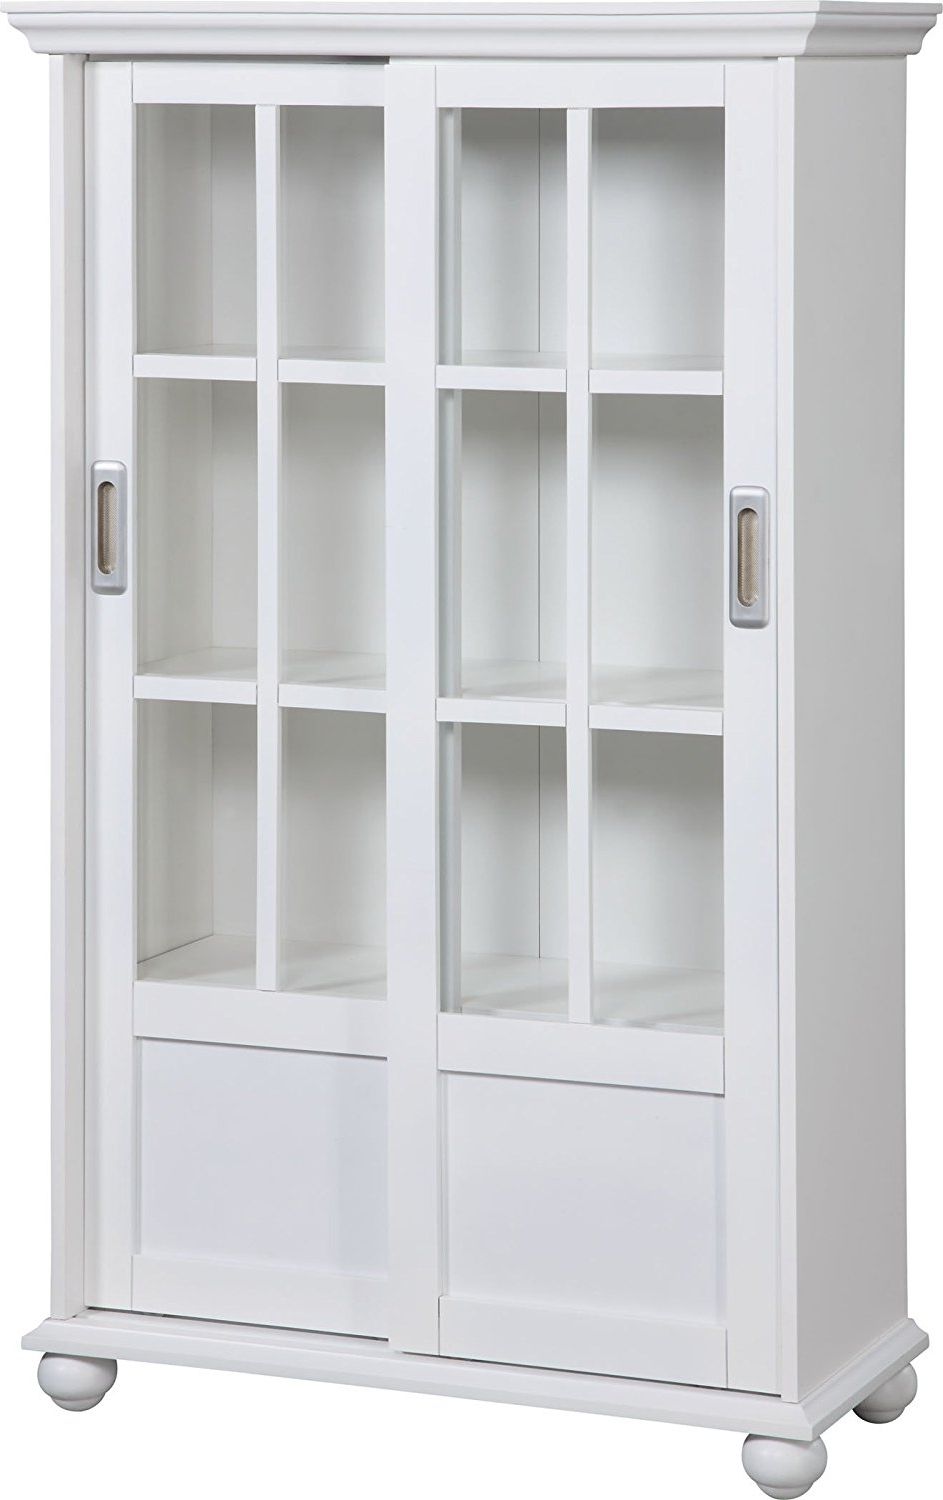 Amazon: Altra 9448096 Bookcase With Sliding Glass Doors, White Regarding Trendy White Bookcases With Glass Doors (View 1 of 15)